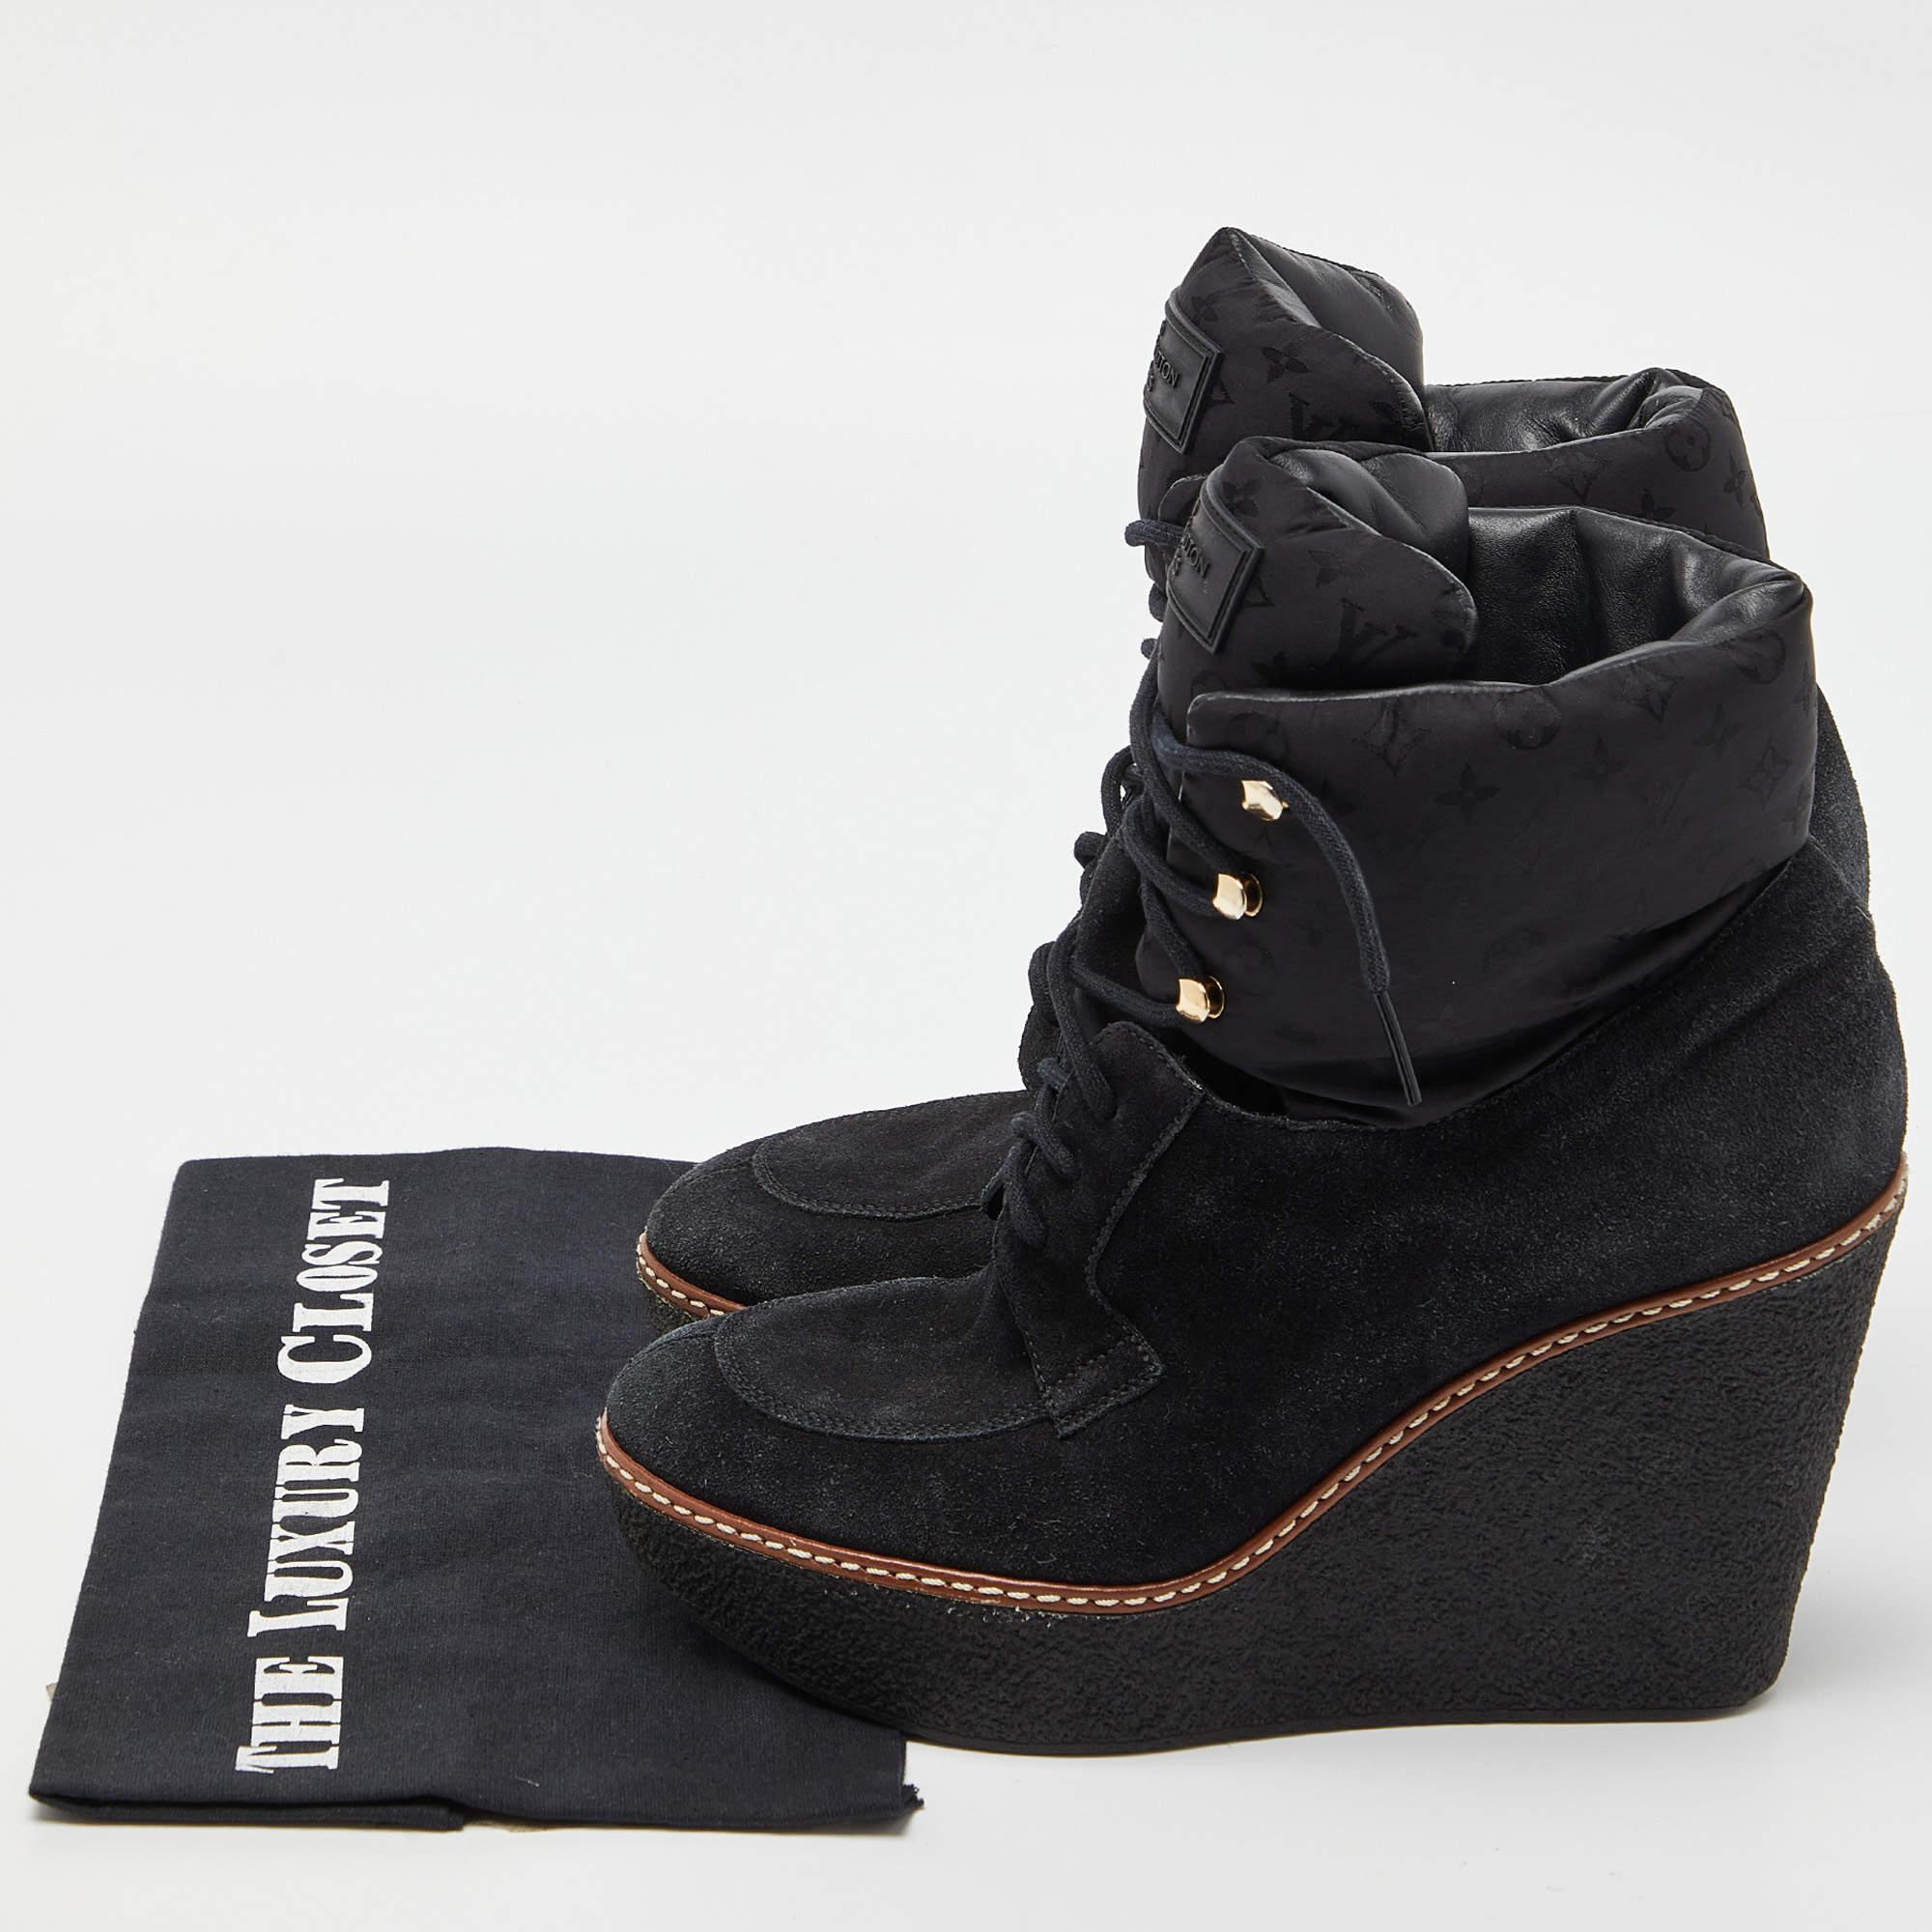 Louis Vuitton Black Suede and Monogram Fabric Wedge Ankle Boots For Sale 5